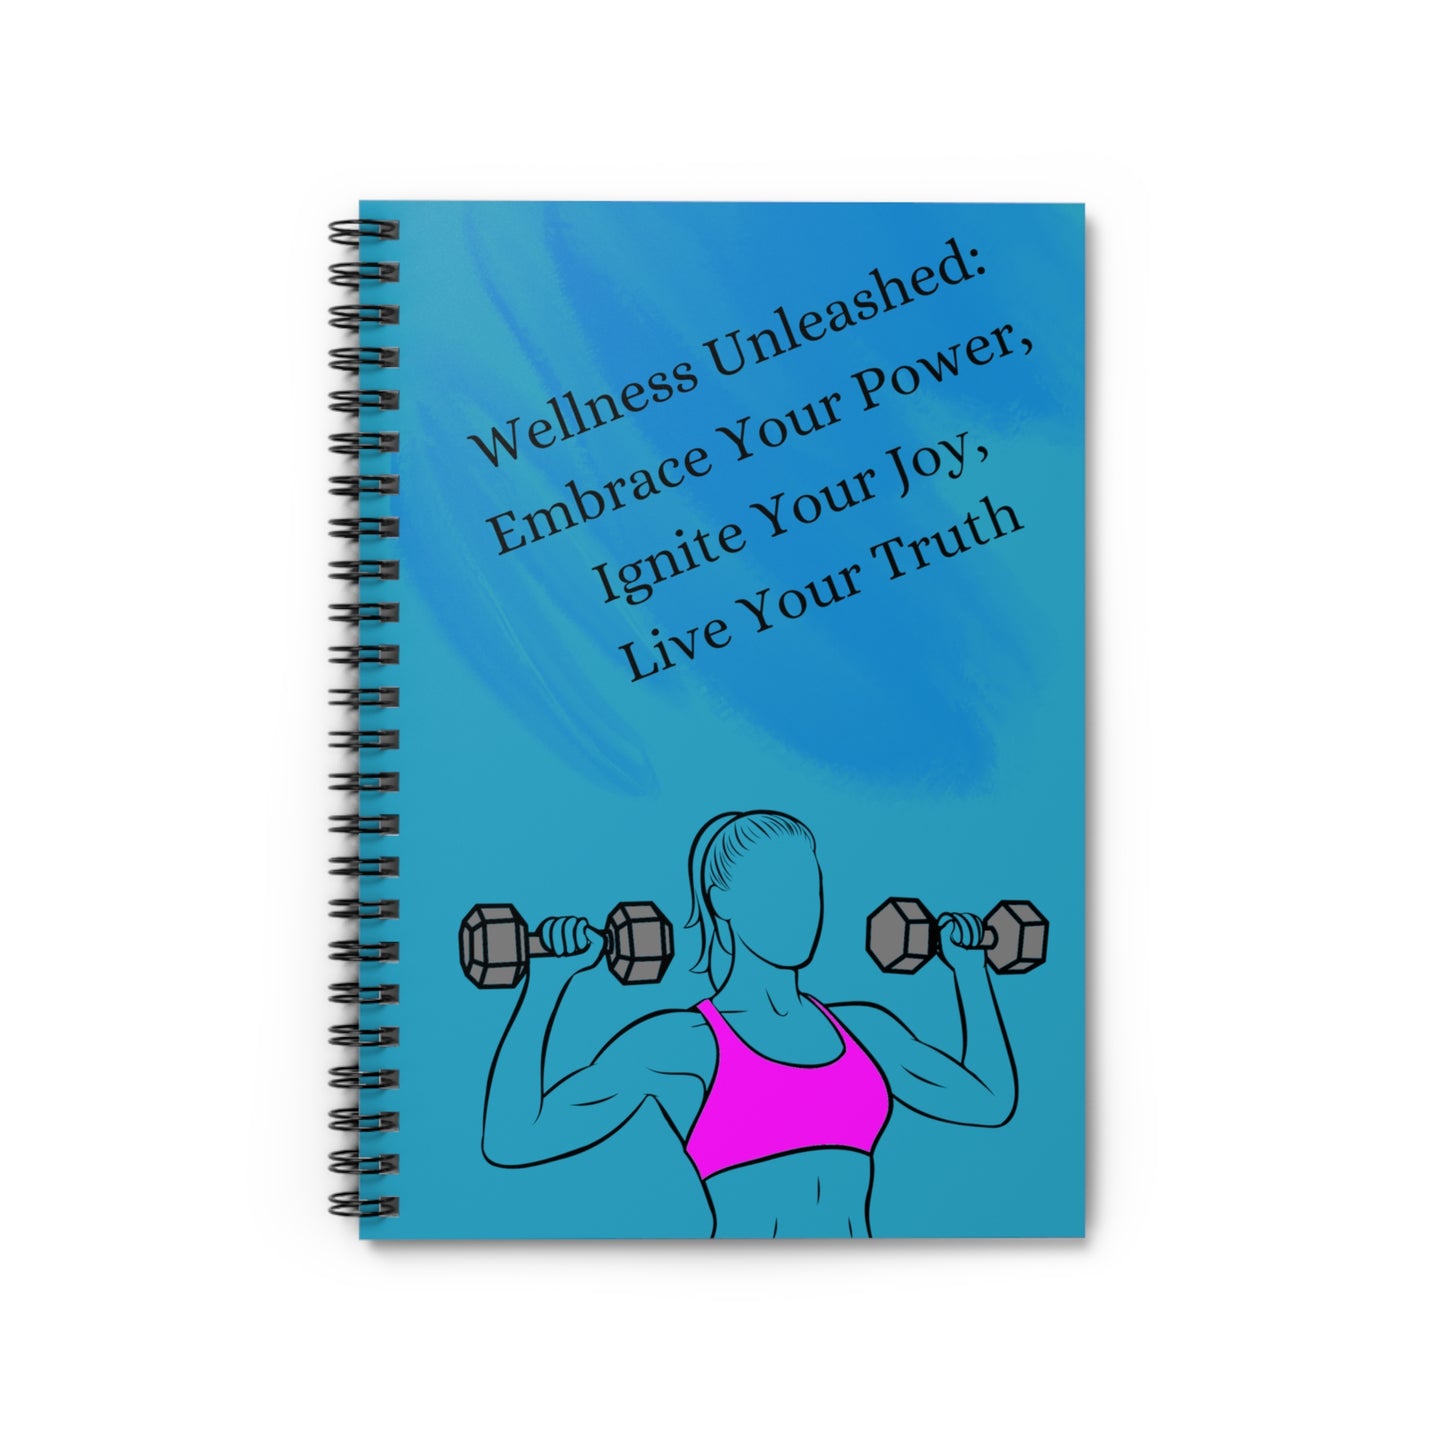 Embrace Your Power: Spiral Notebook - Log Books - Journals - Diaries - and More Custom Printed by TheGlassyLass